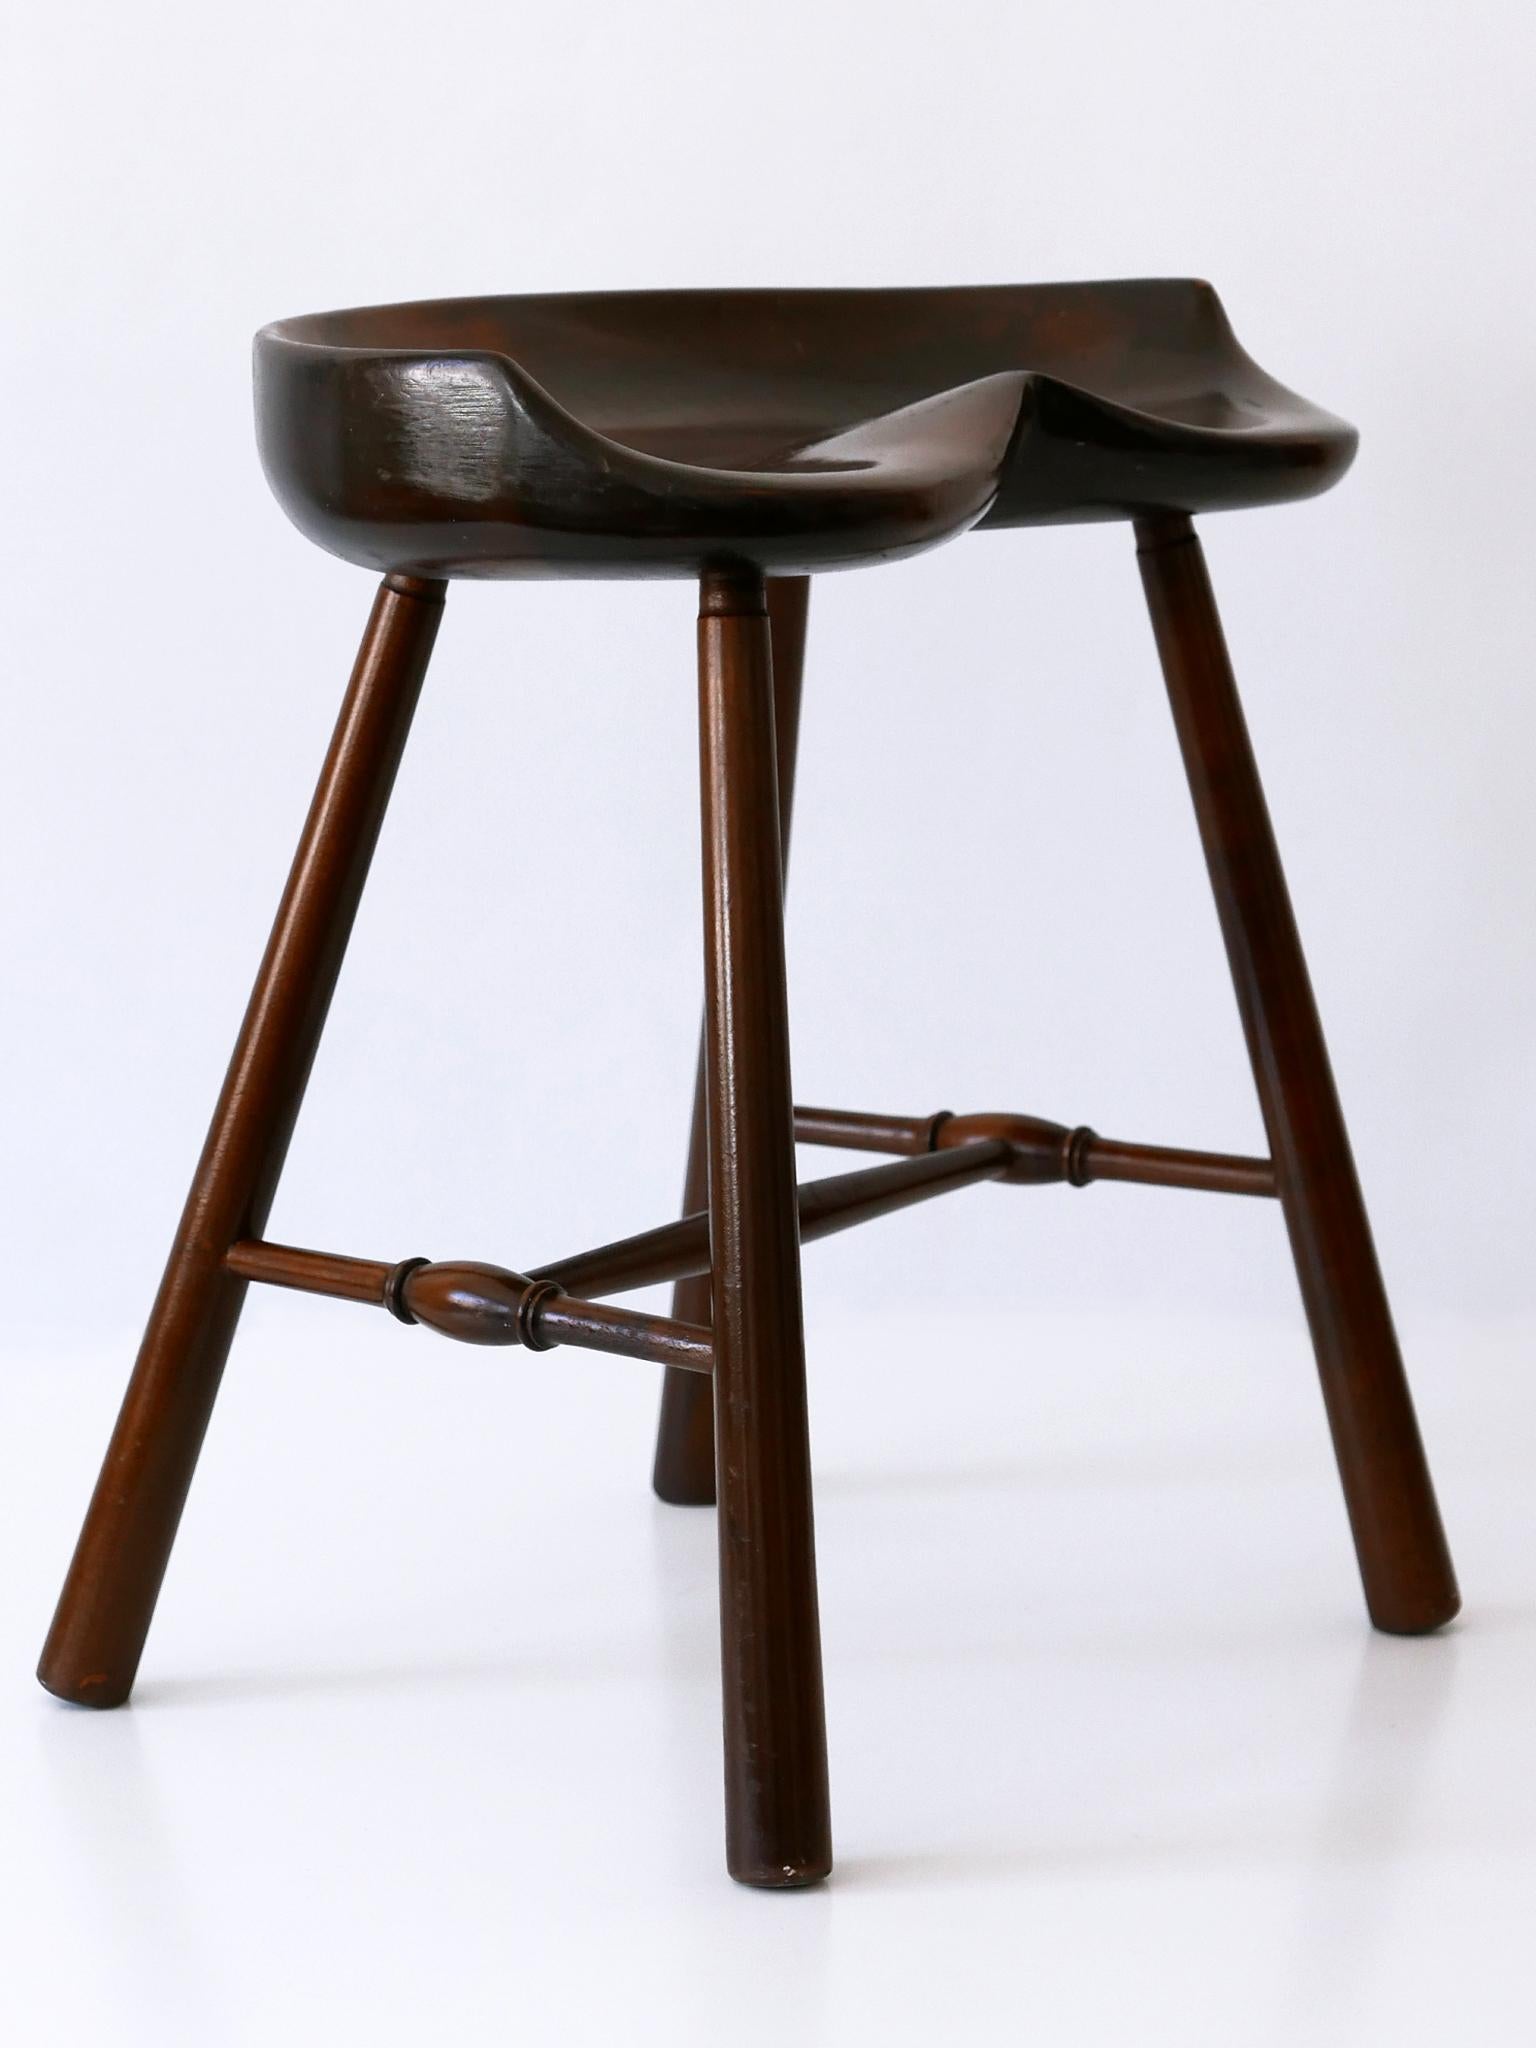 Sculptural Mid-Century Modern Solid Wood Stool Germany 1950s For Sale 3